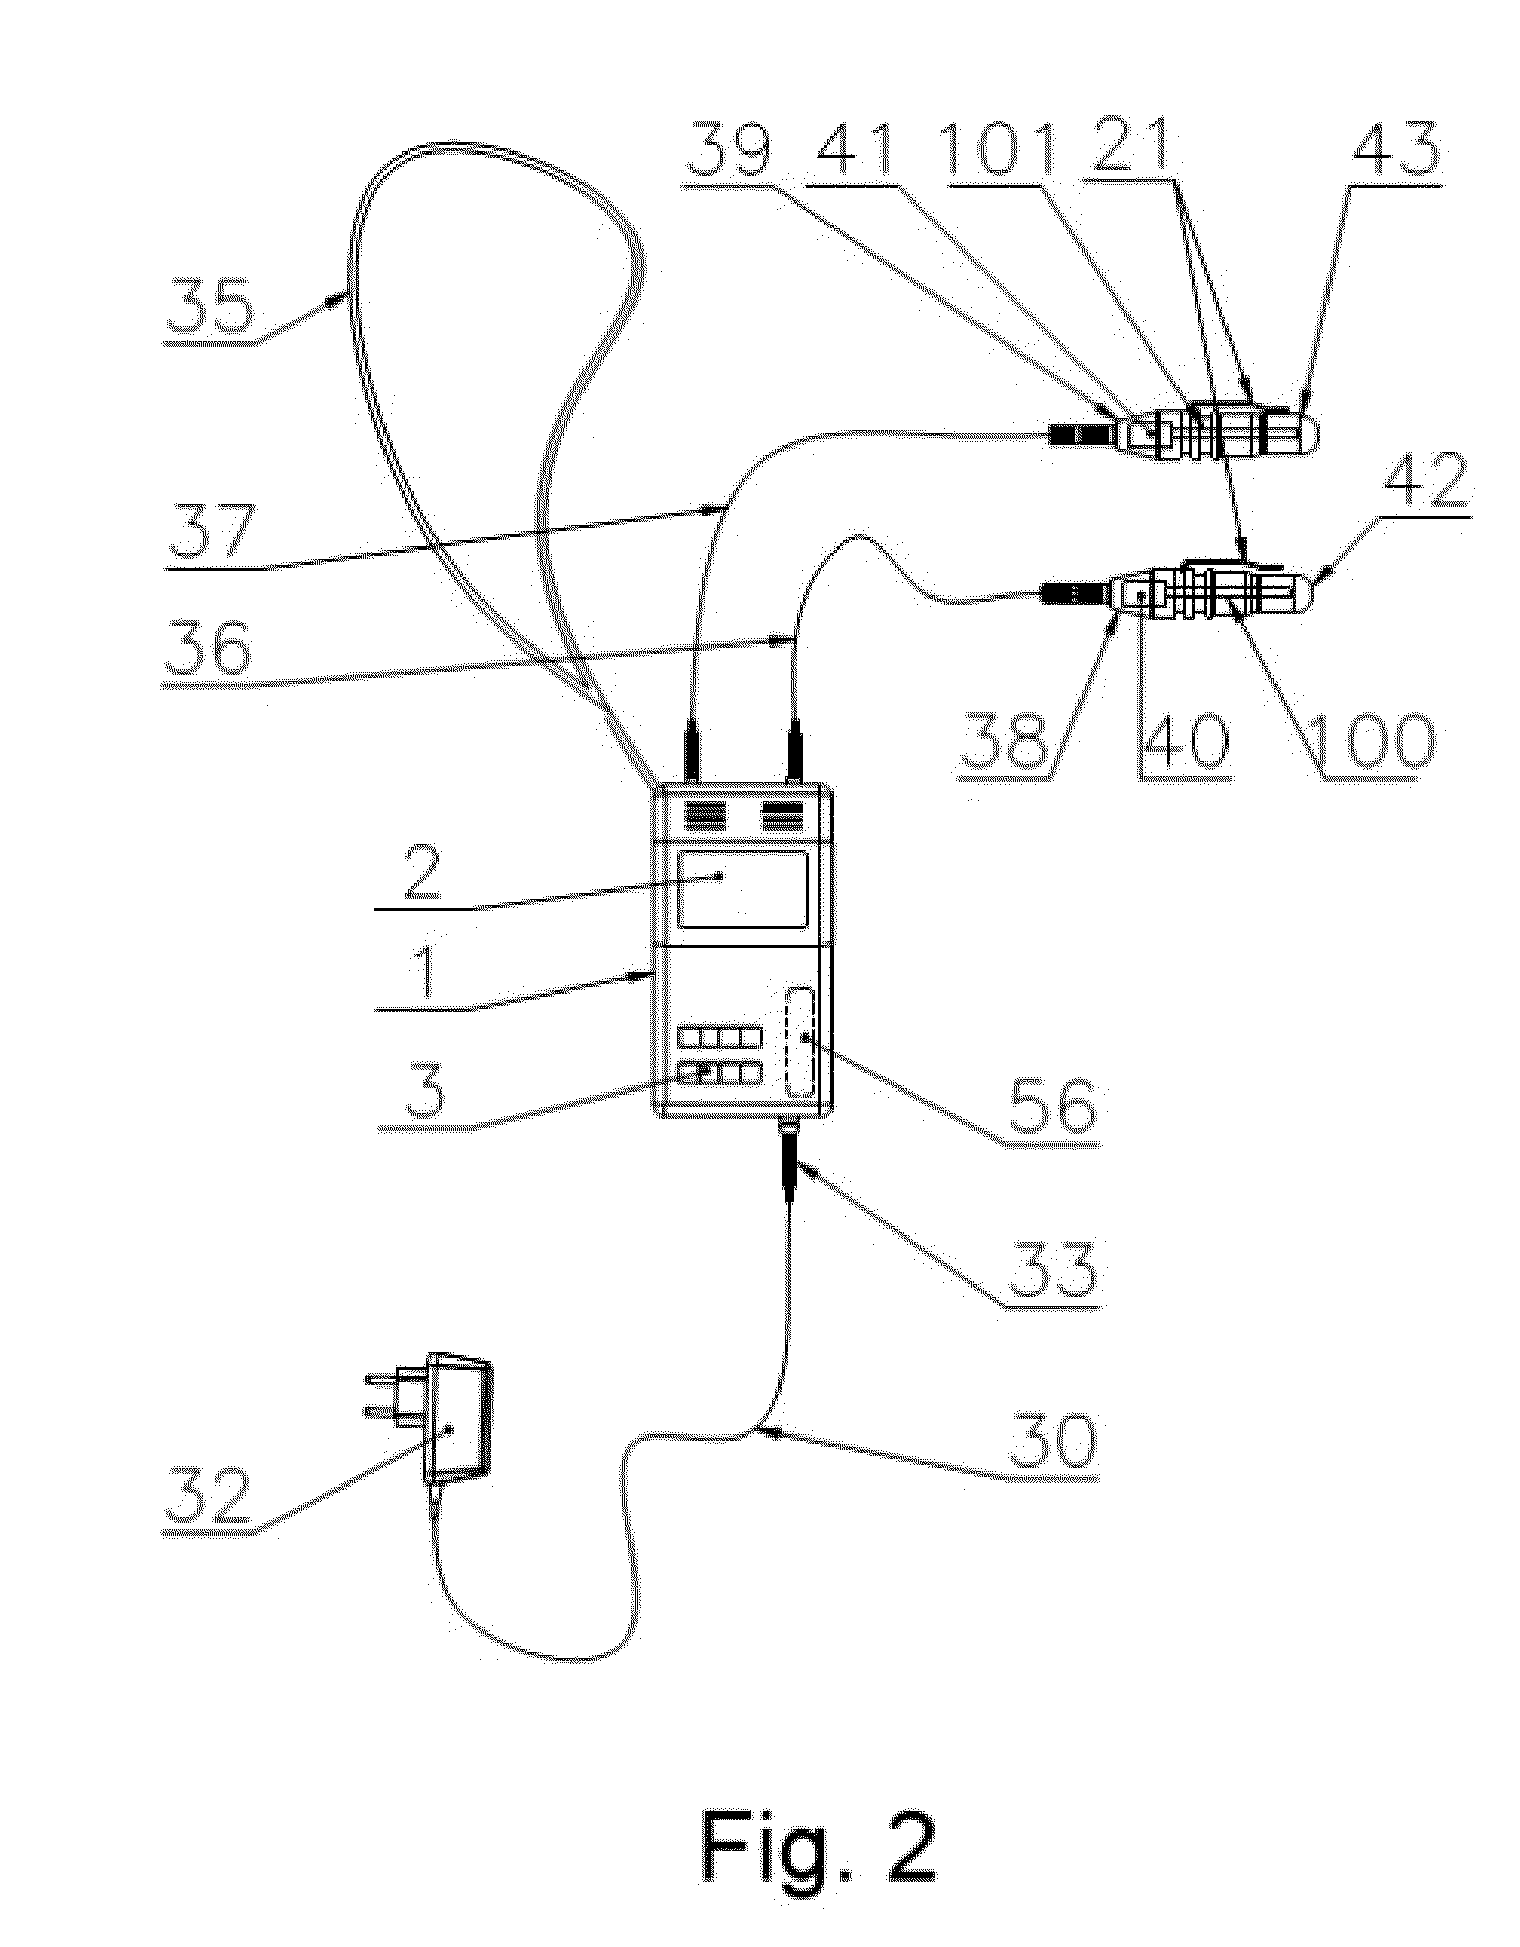 Device for stimulation of the brain by laser circularly or elliptically polarized light